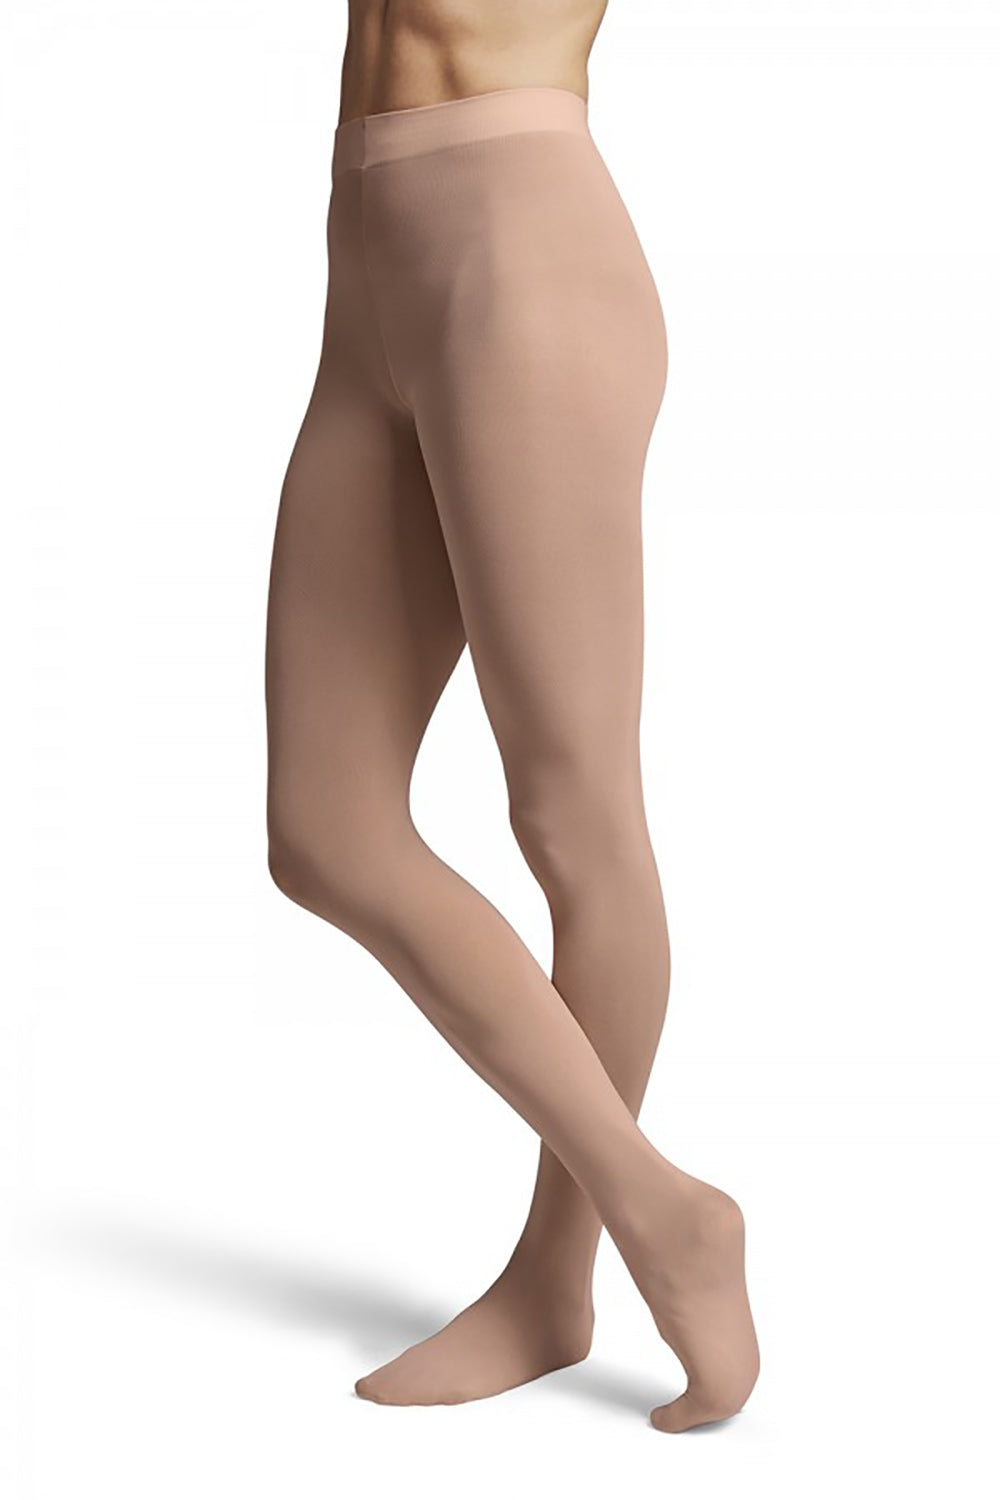 BLOCH T0981L LADIES CONTOURSOFT FOOTED TIGHTS – The Dance Shoppe